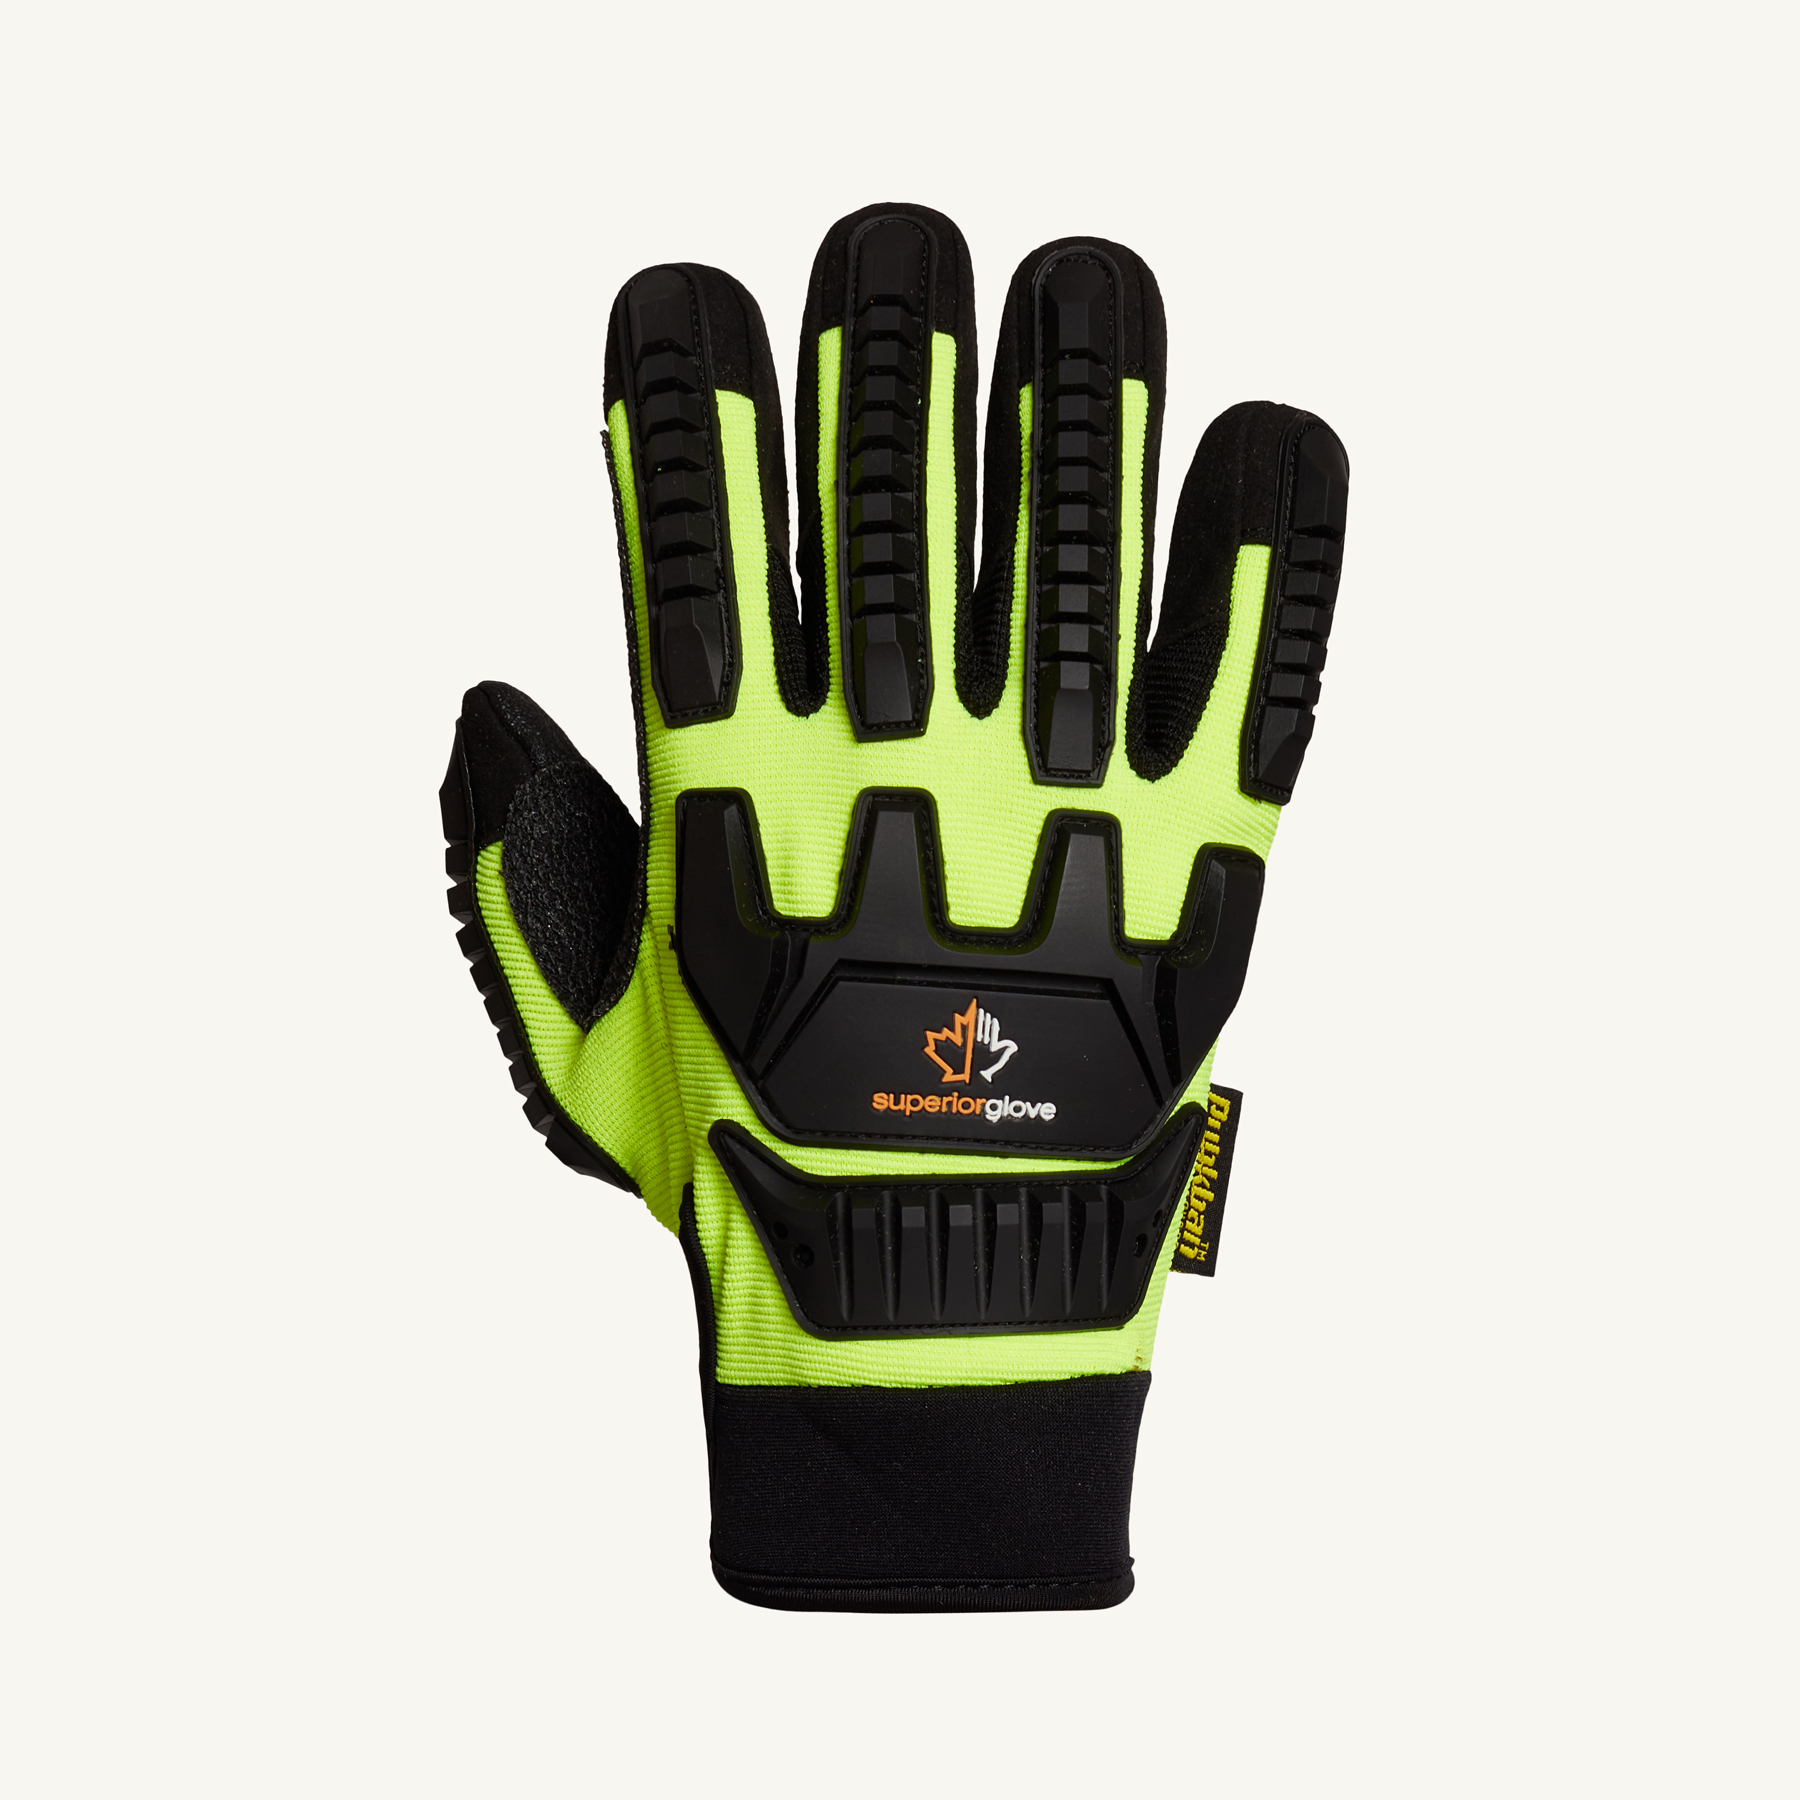 #MXVSBPB Superior Glove® Clutch Gear® Impact Protection Mechanics Glove Lined with Punkban™